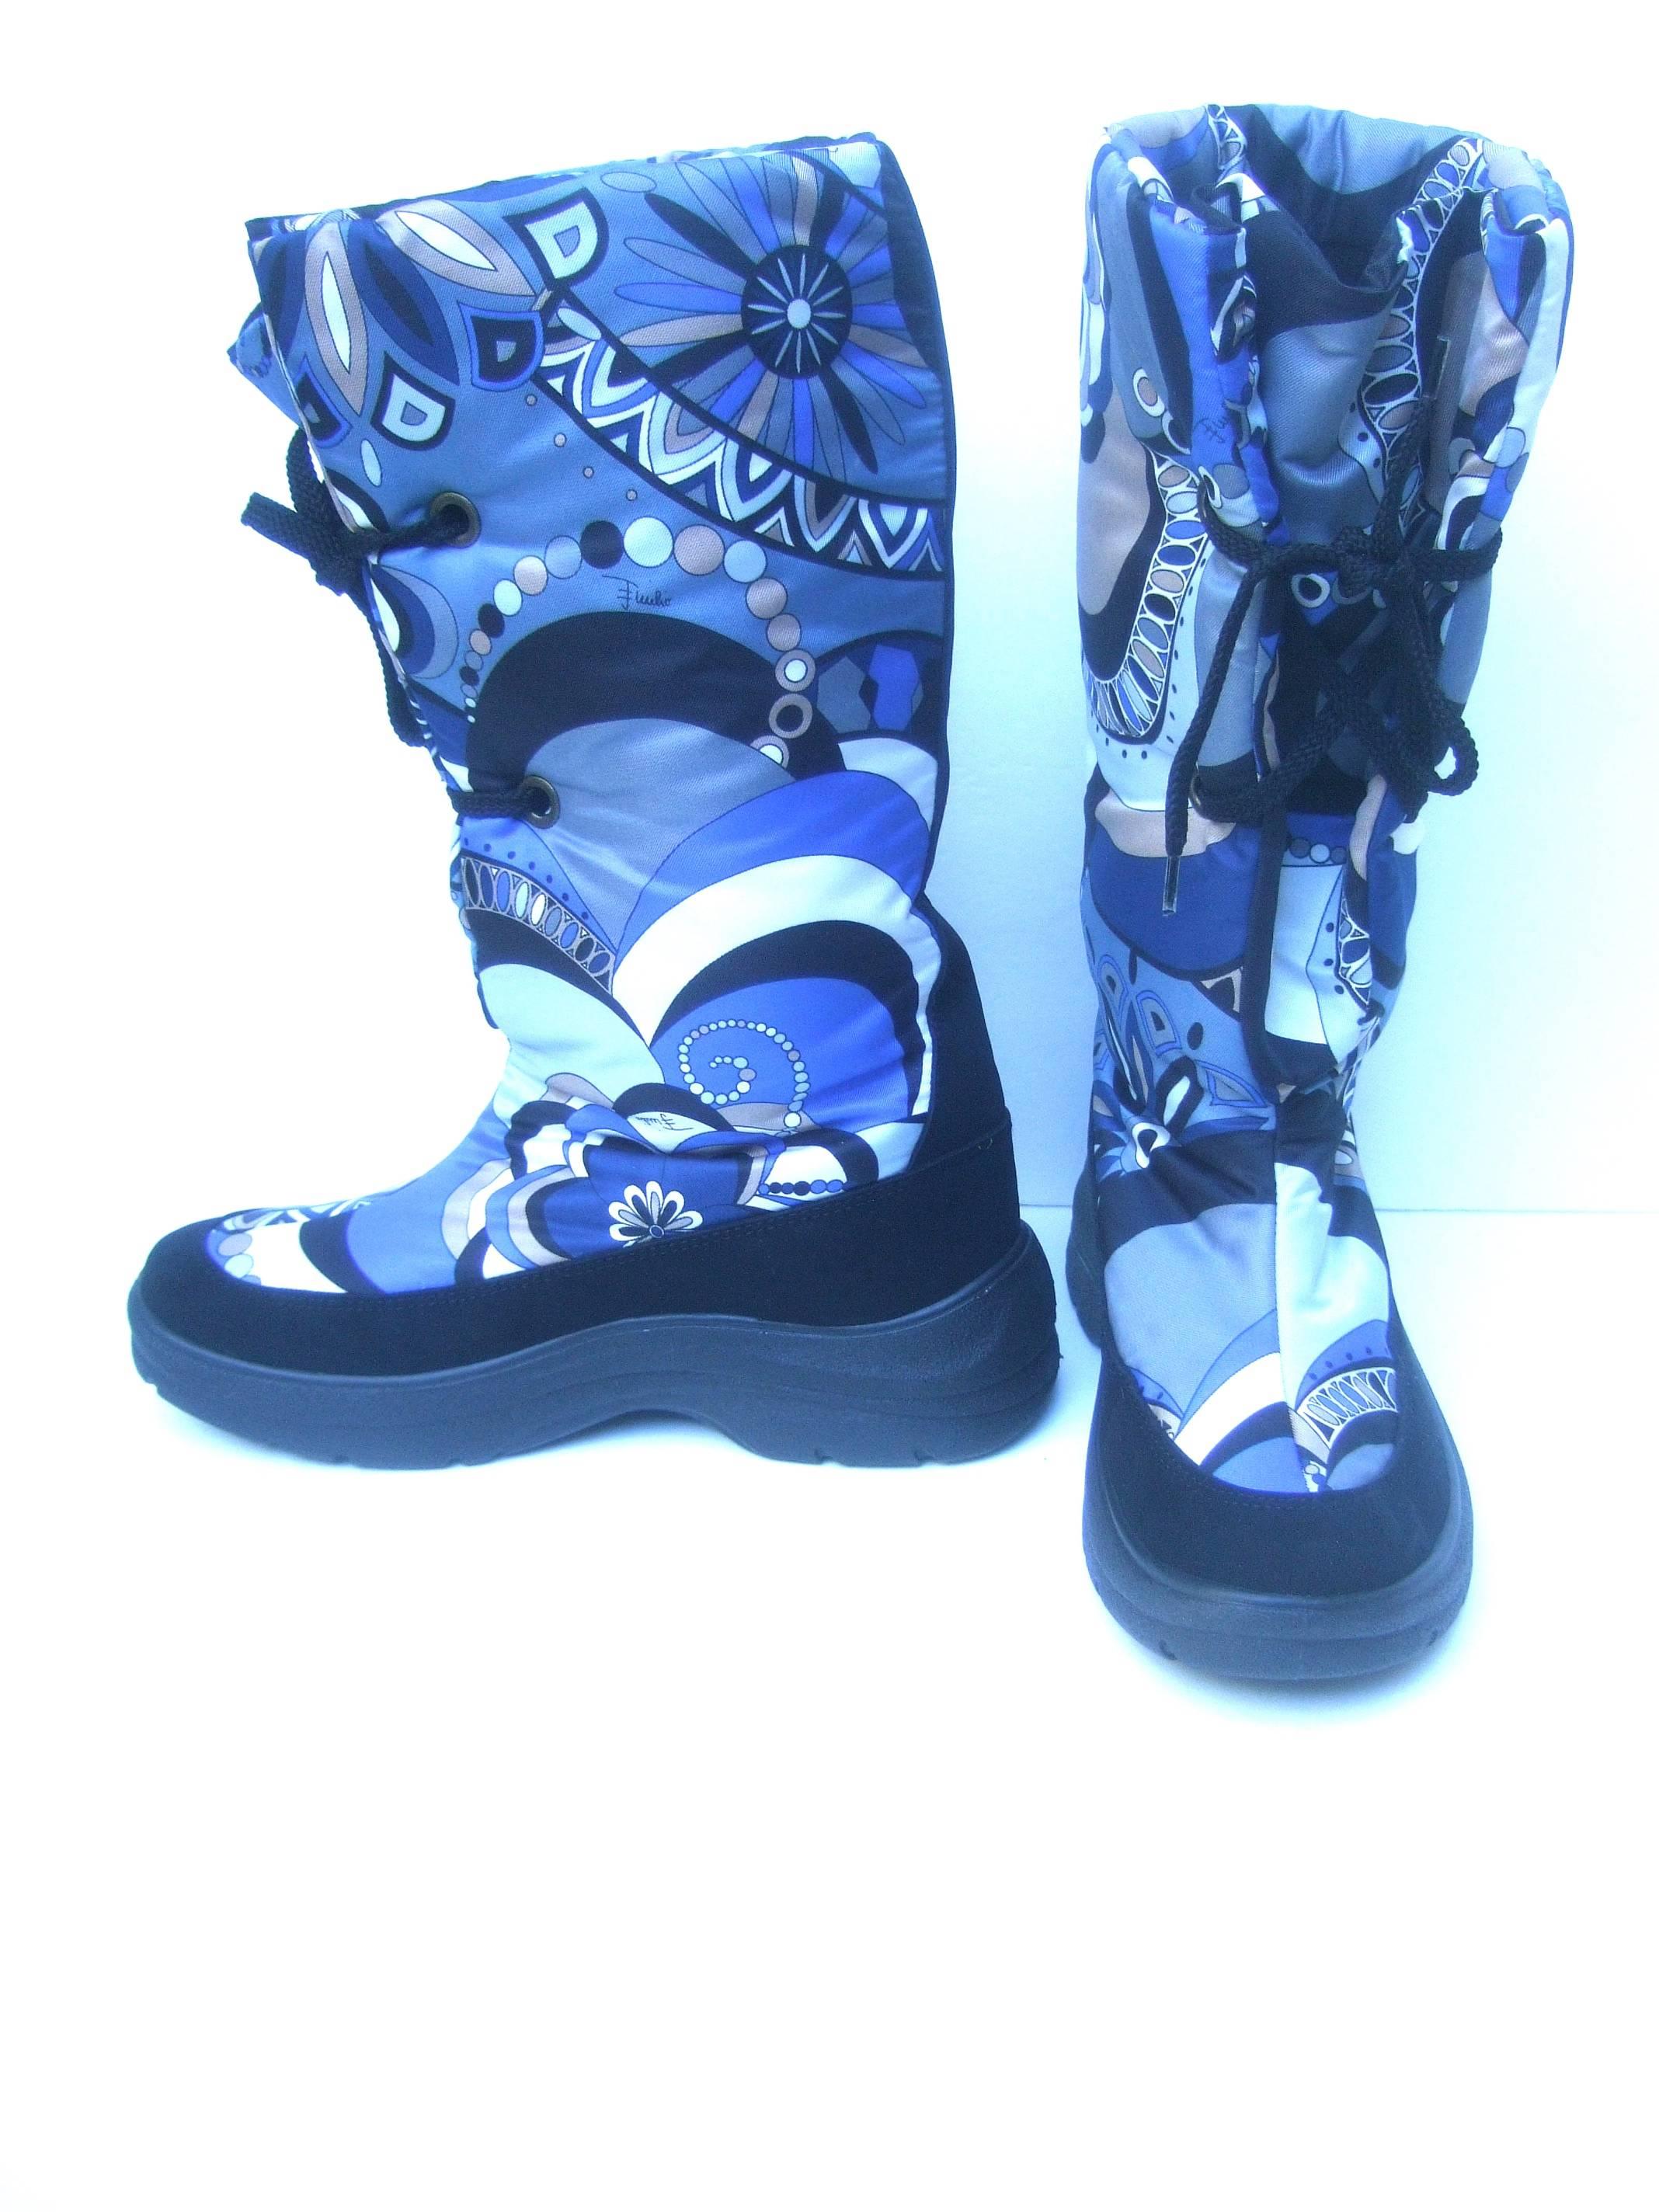 Emilio Pucci Bold nylon print ski boots Size 40 
The stylish ski boots are illustrated with Pucci's
iconic op art vibrant graphics

Concealed within the blue, gray, black, white
& tan mod graphics is Emilio's script name 
The designer ski